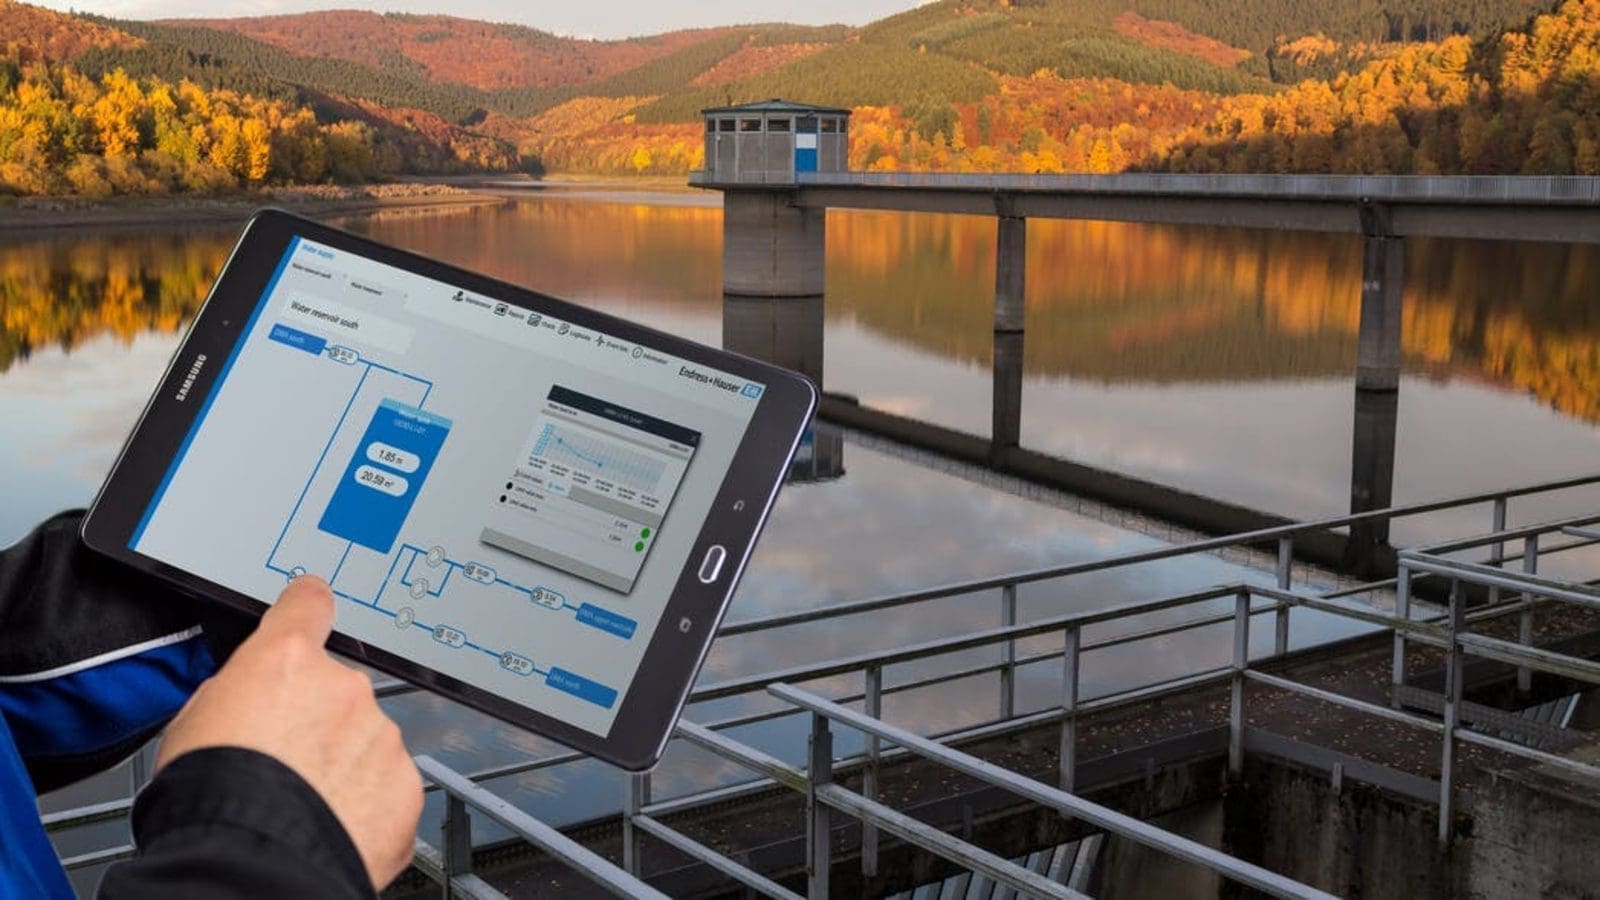 Endress+Hauser introduces new software for optimization and automation of water networks